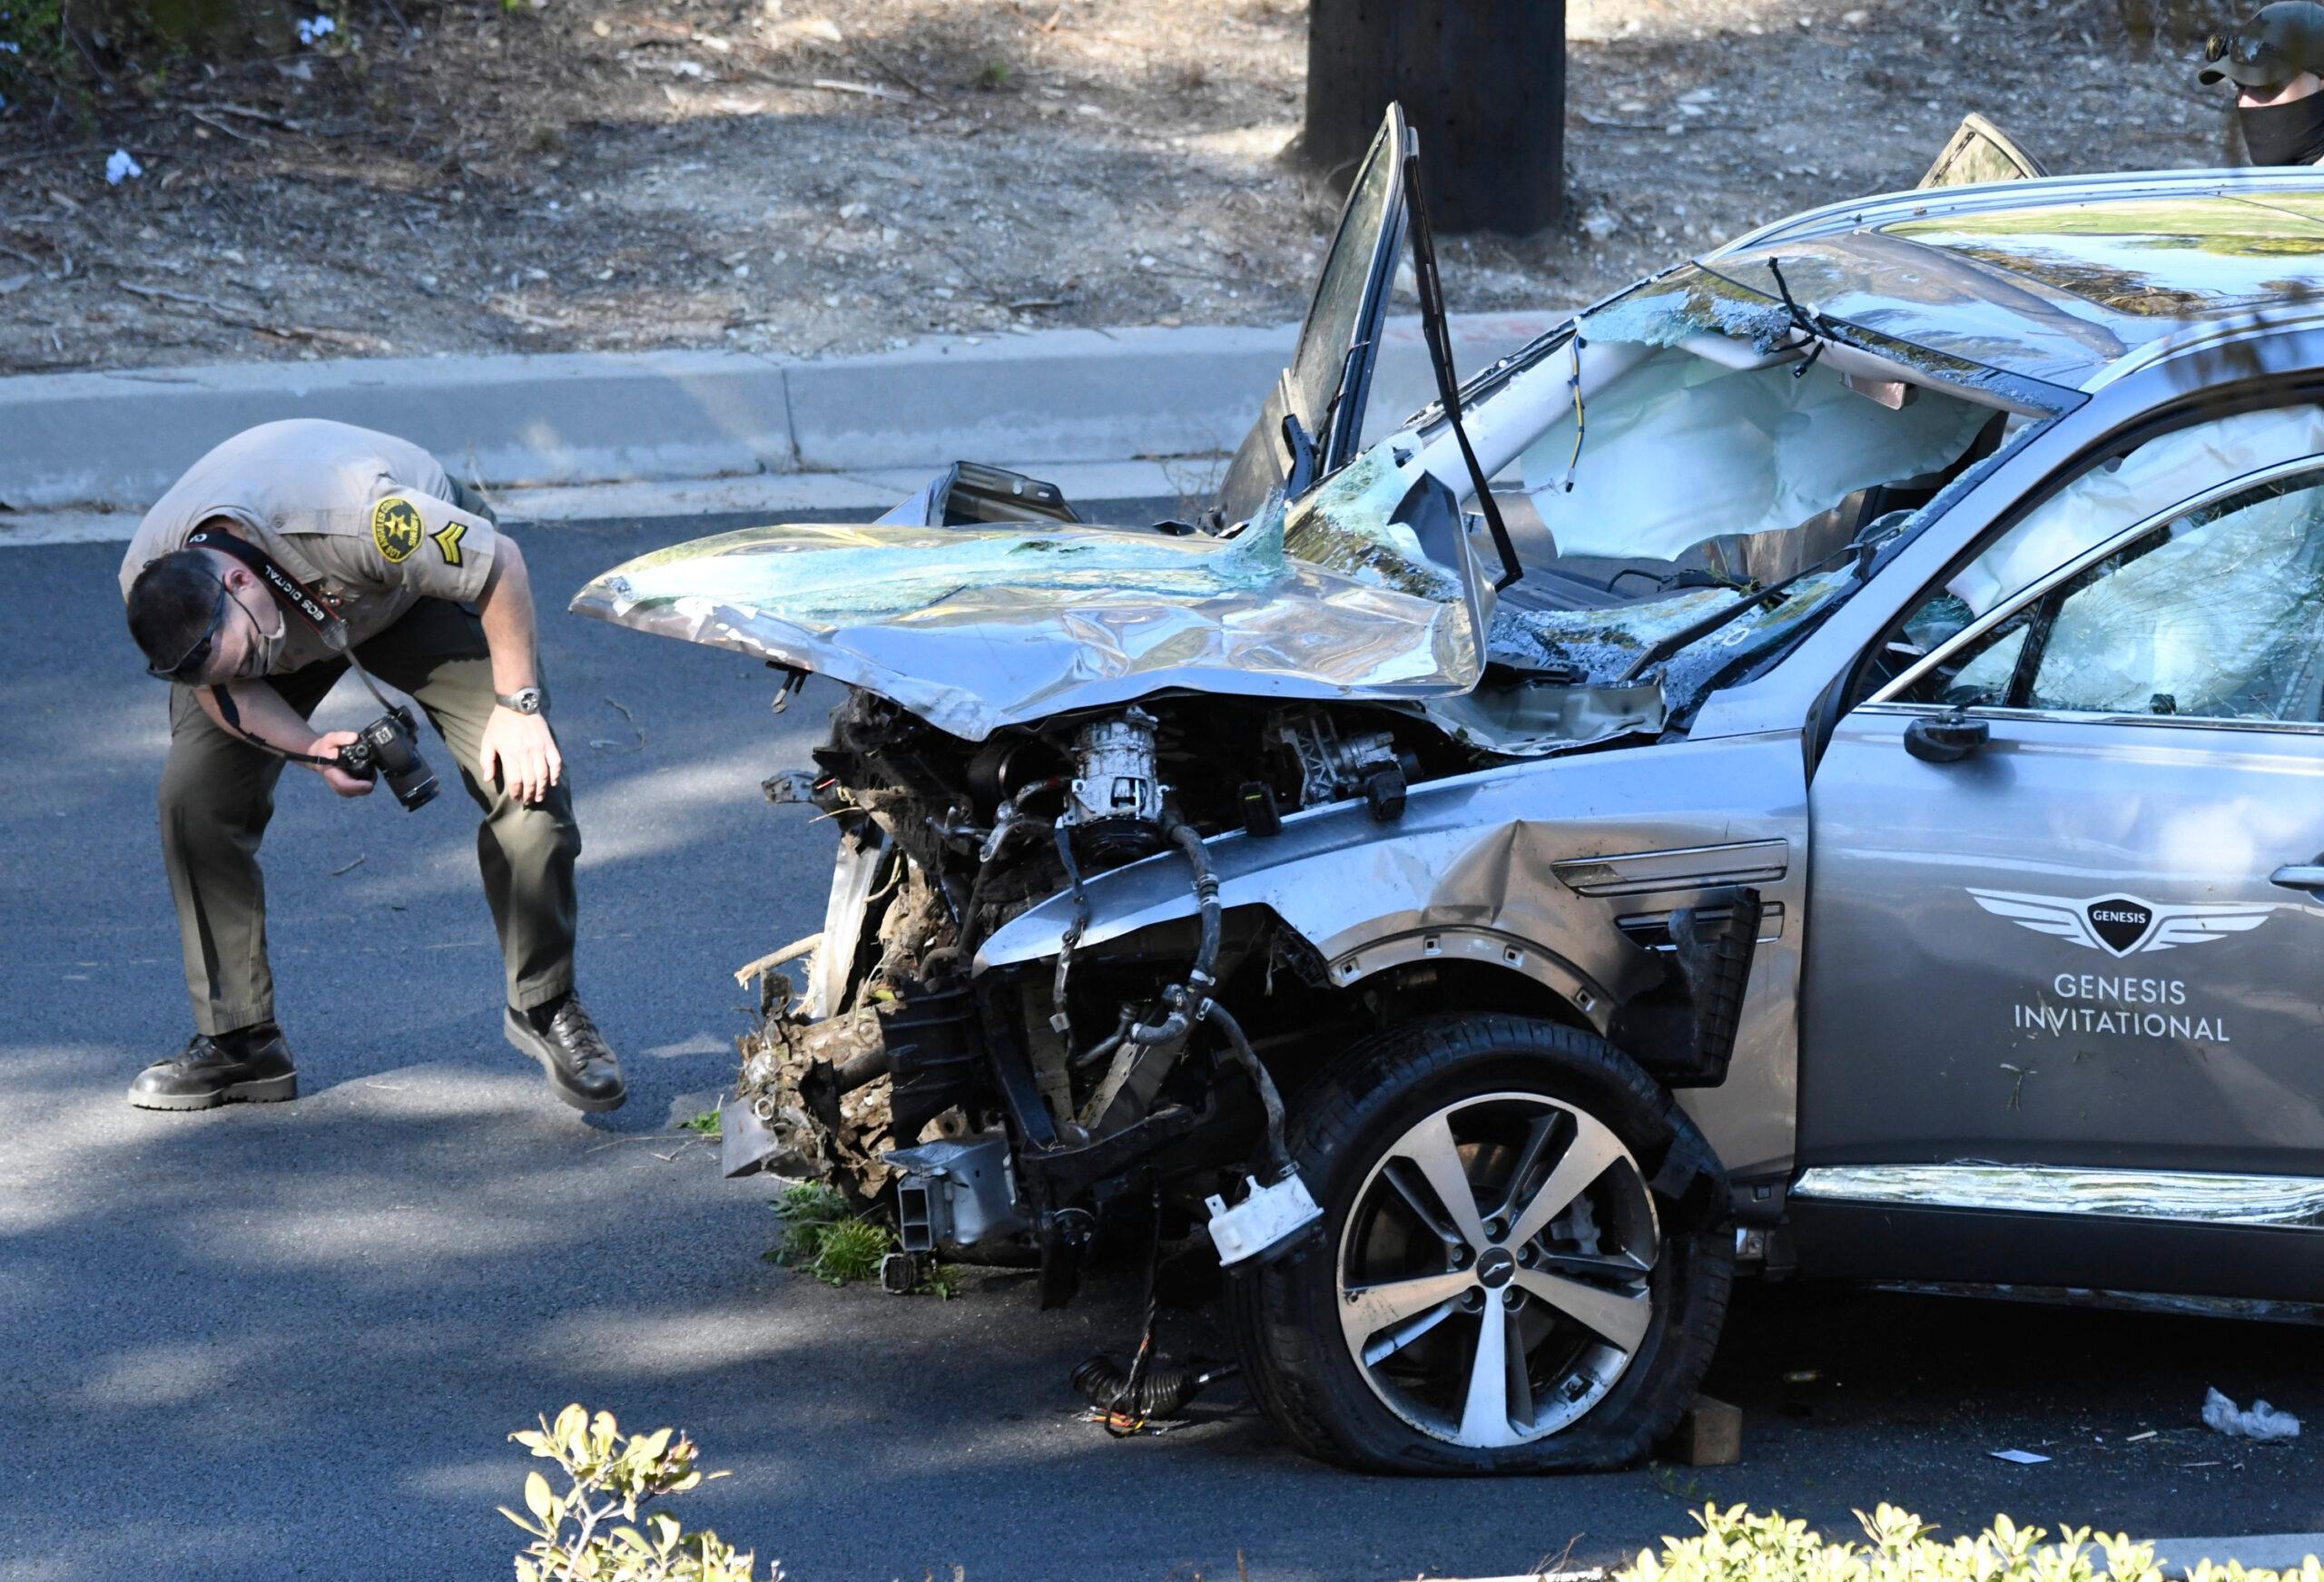 Tiger Woods Injured In Single Car Accident In Los Angeles